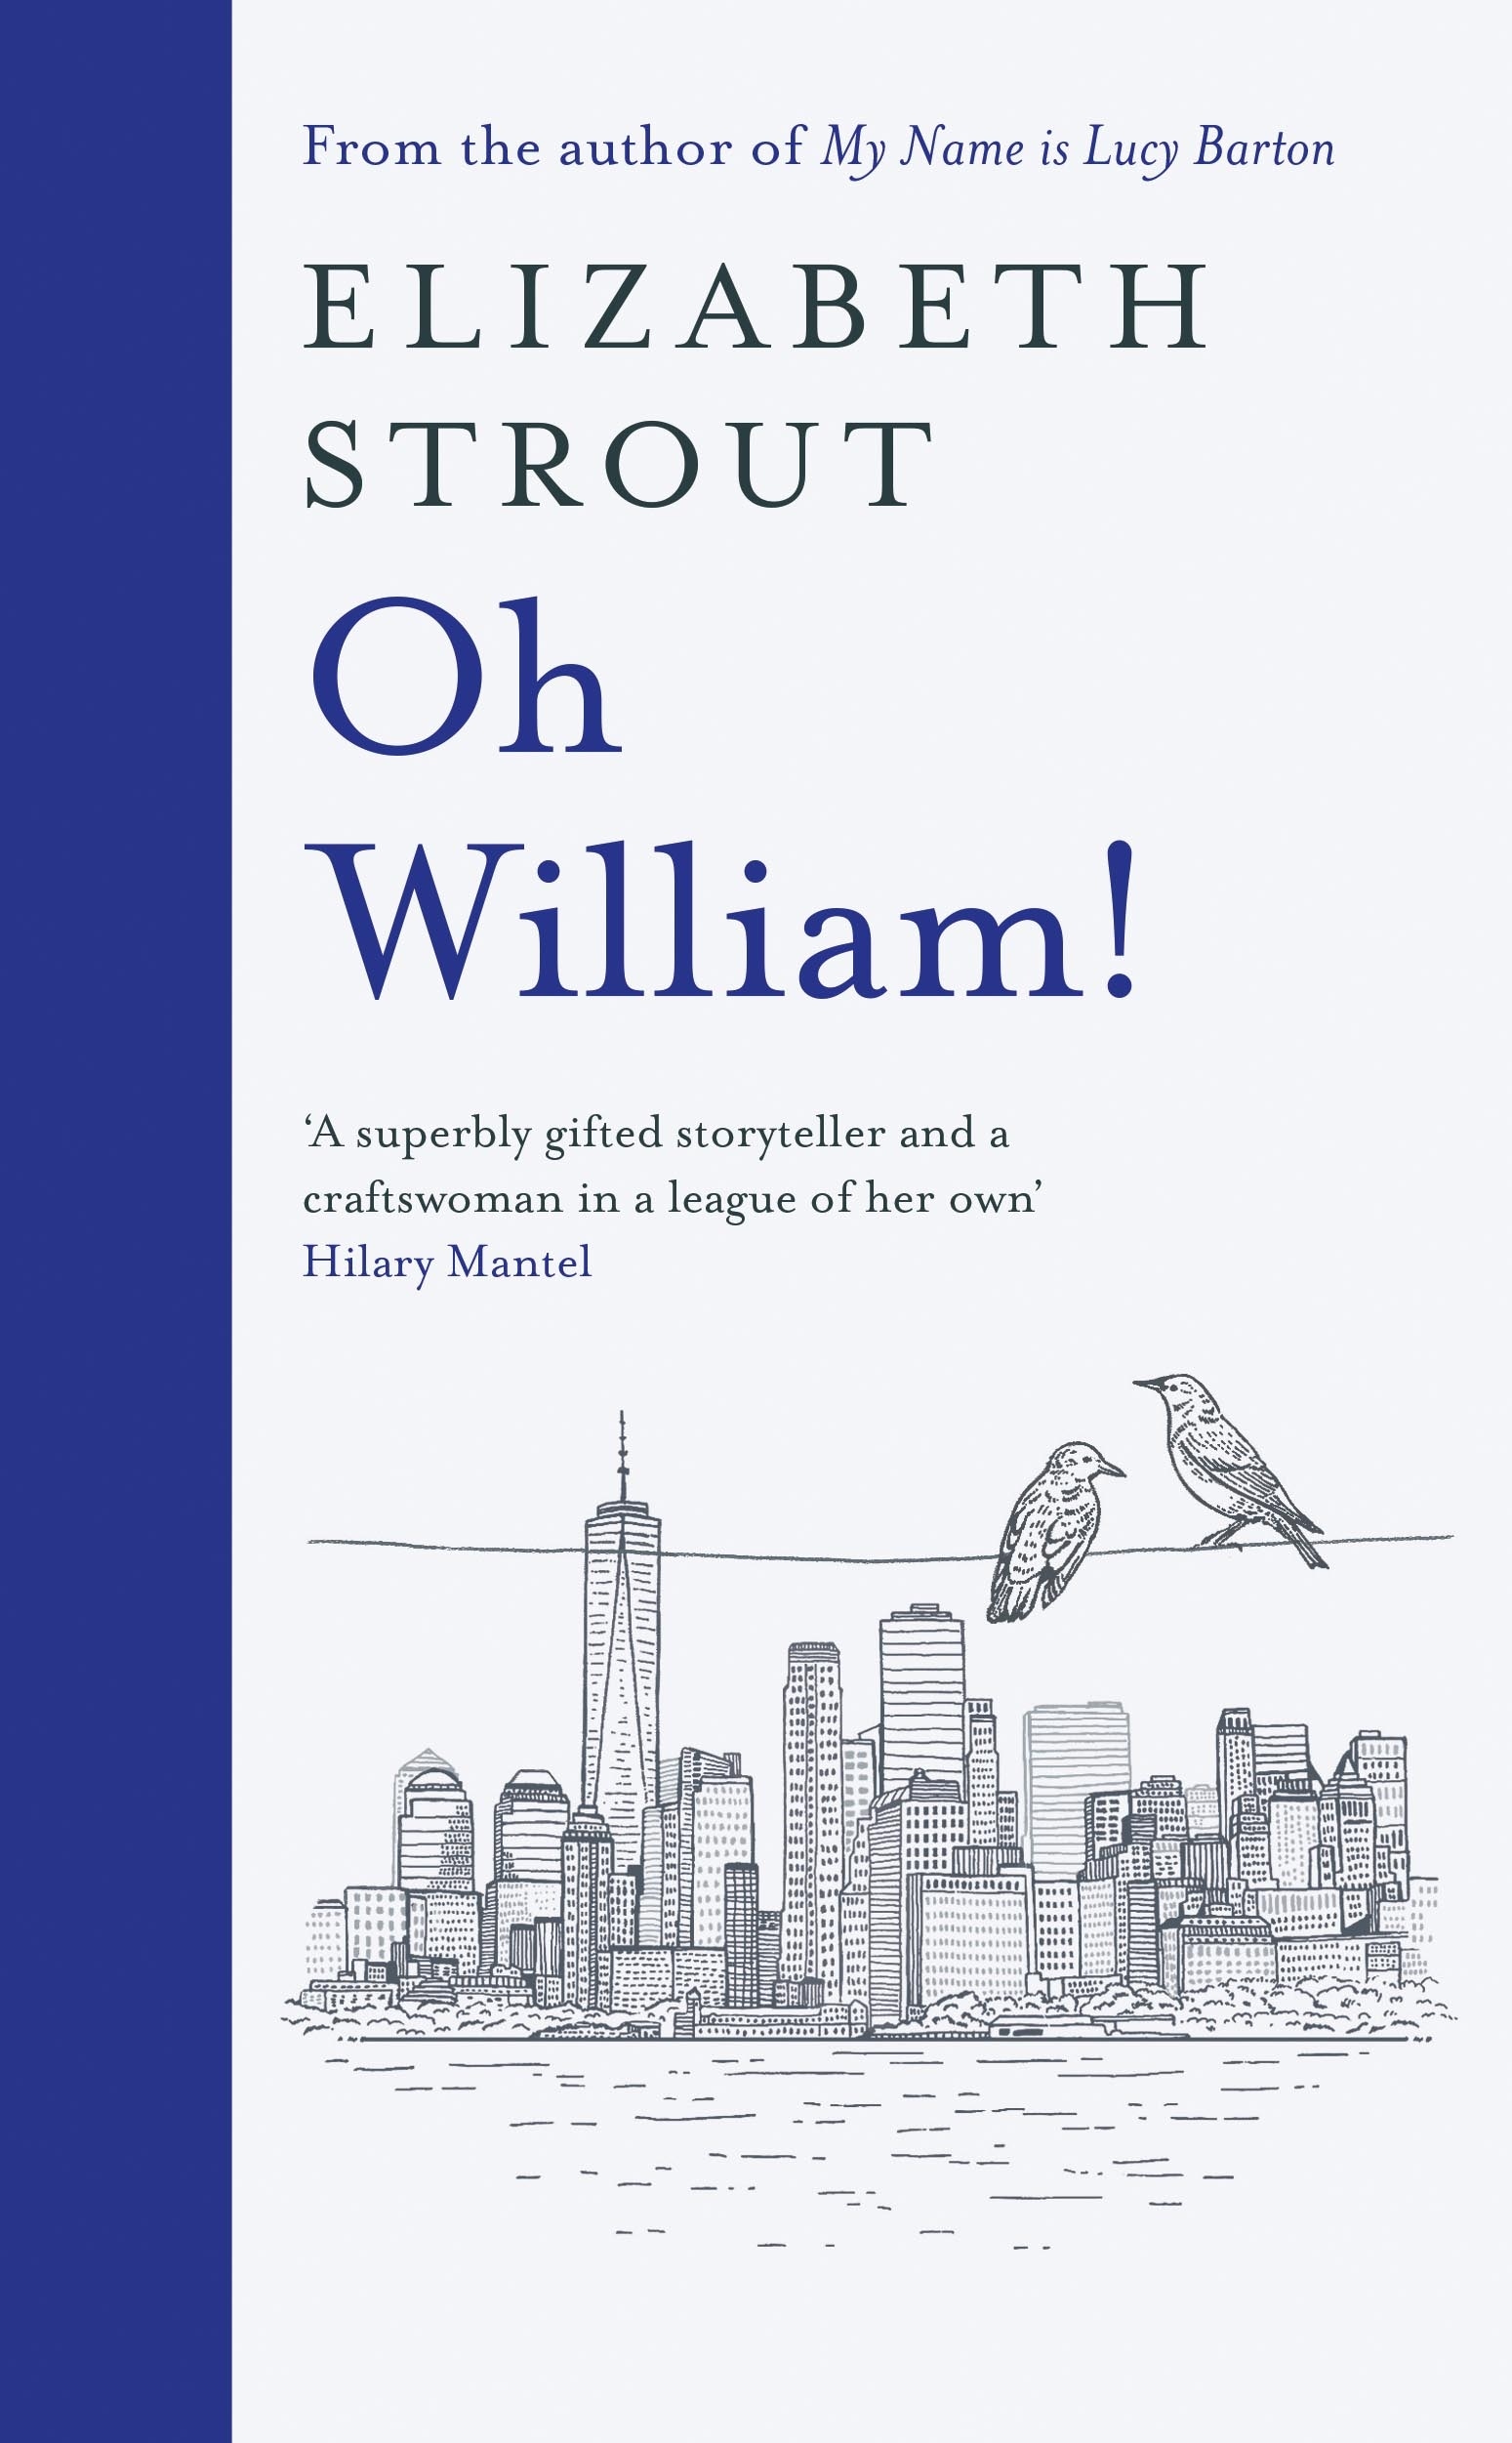 Book “Oh William!” by Elizabeth Strout — October 21, 2021